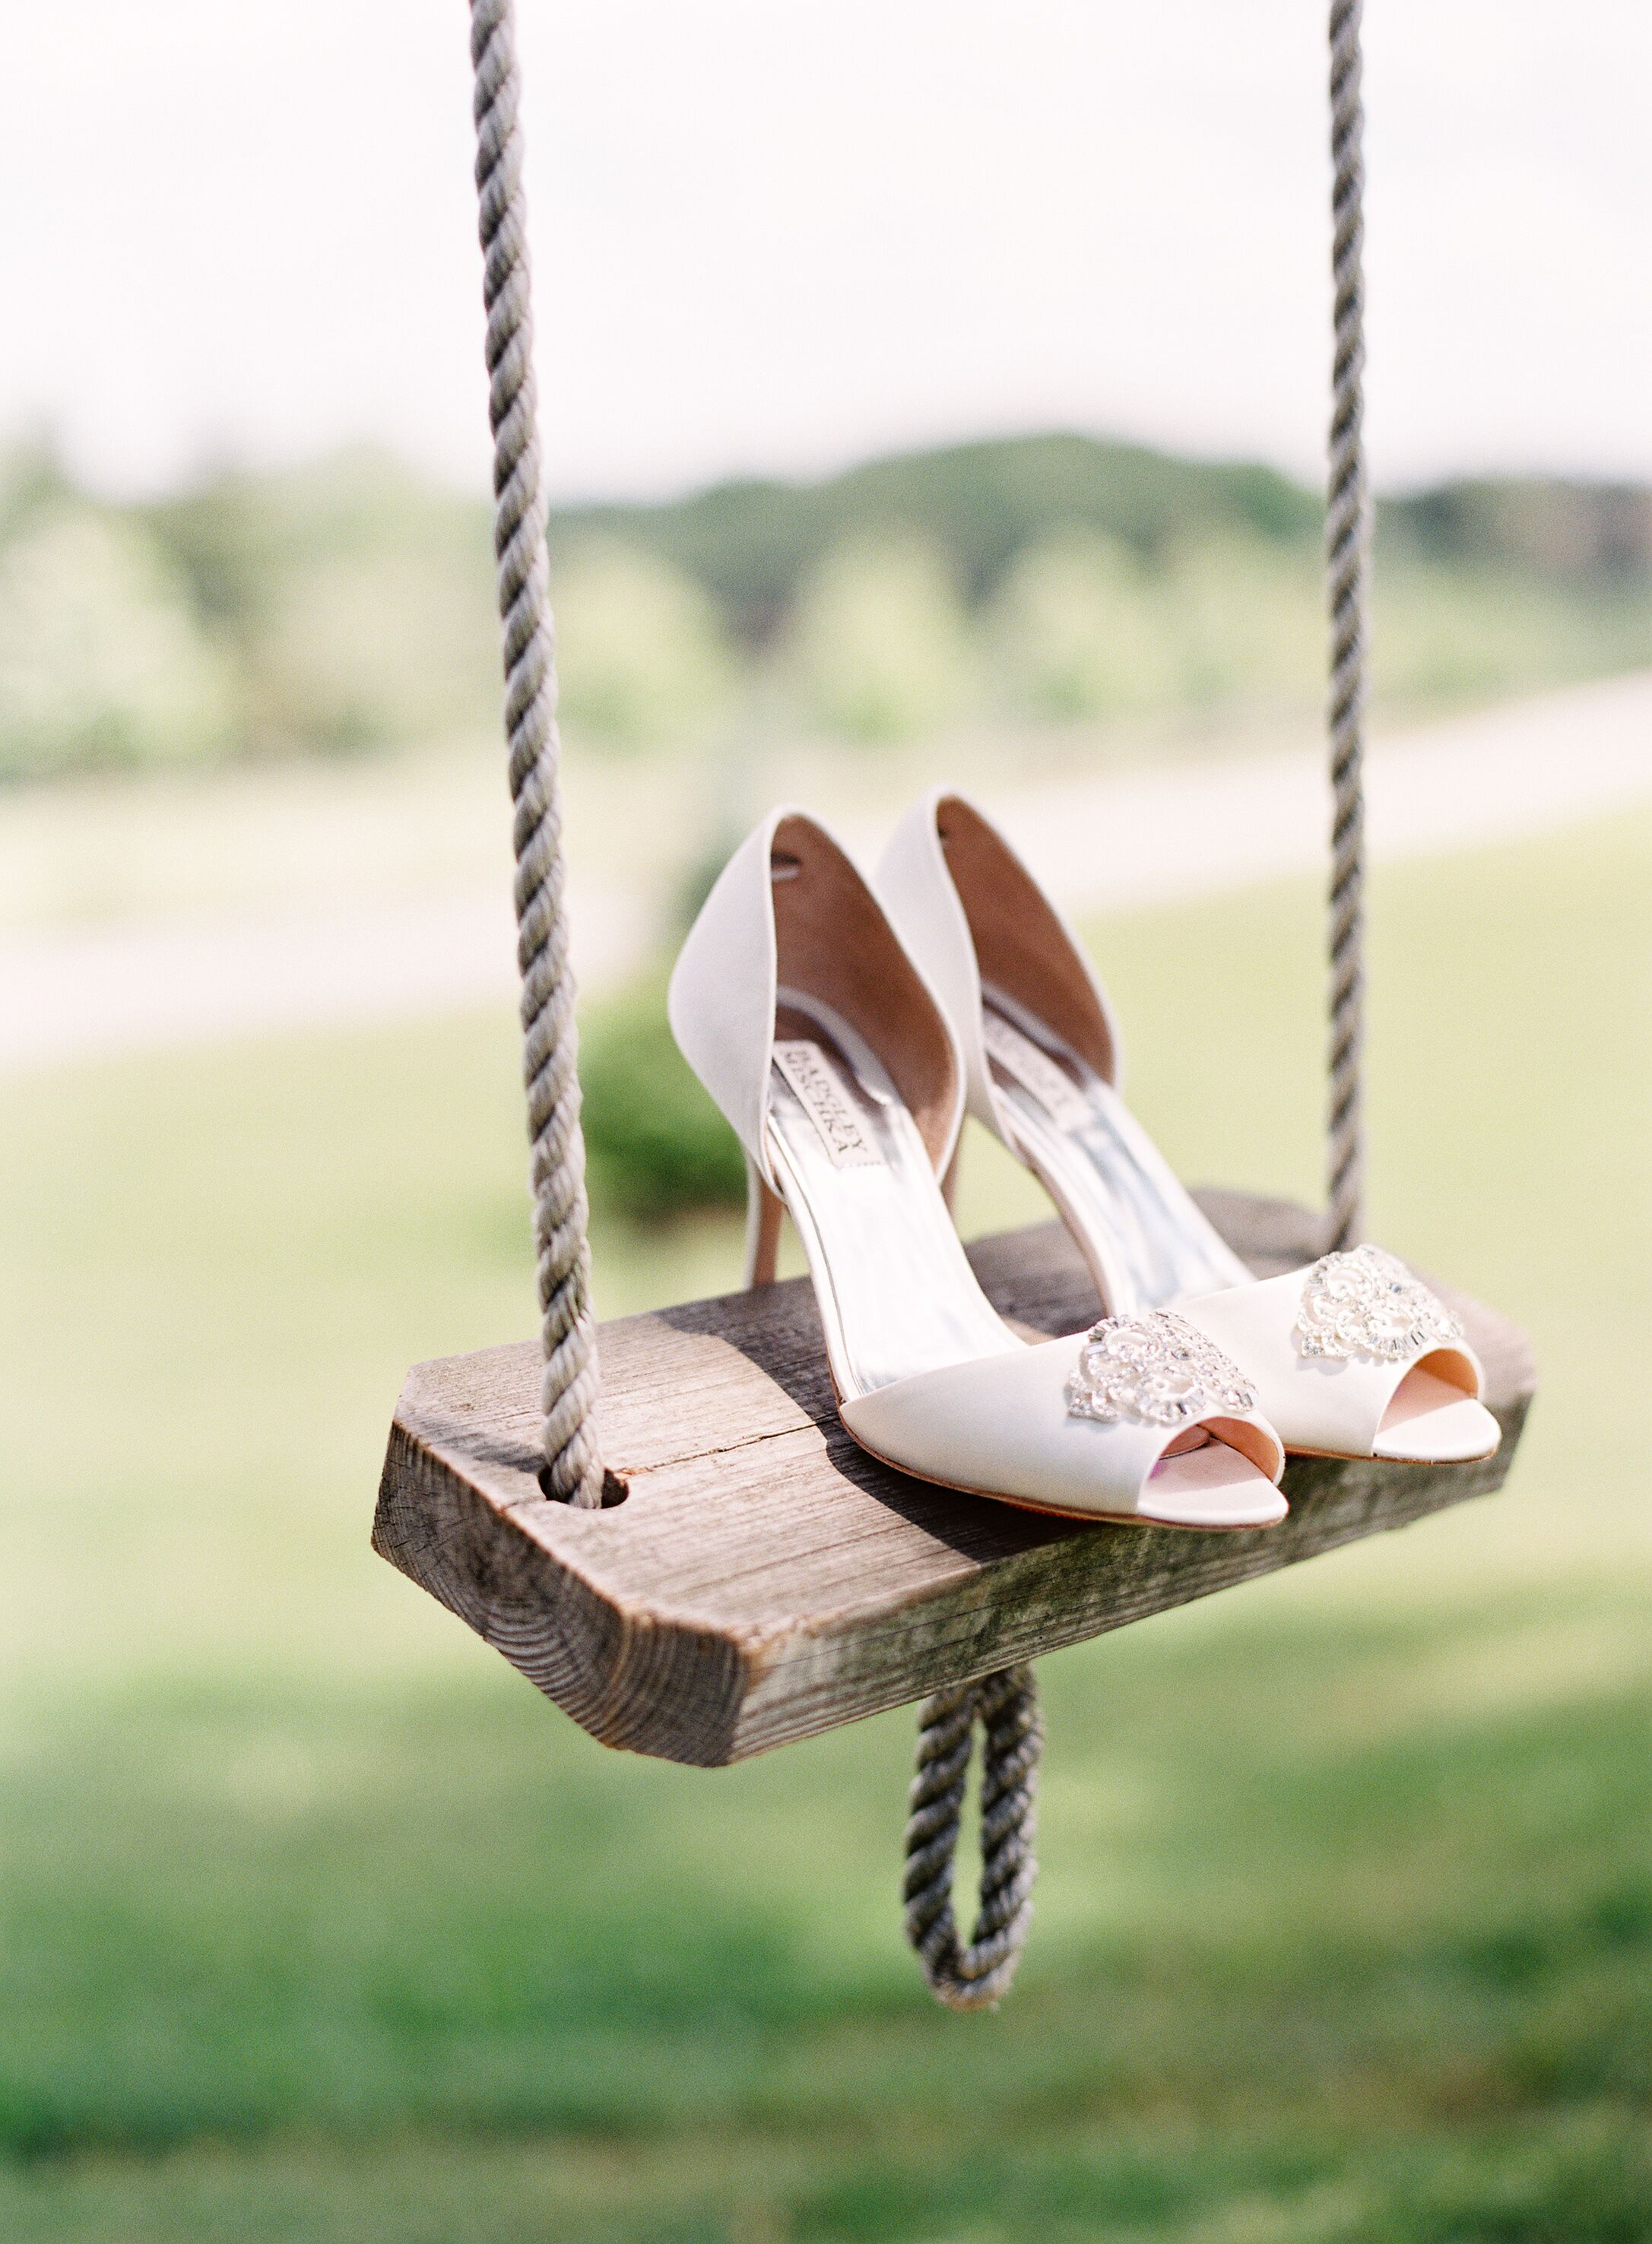 Shoes on Farm Swing_Armstrong Farms Prop Shop.jpg